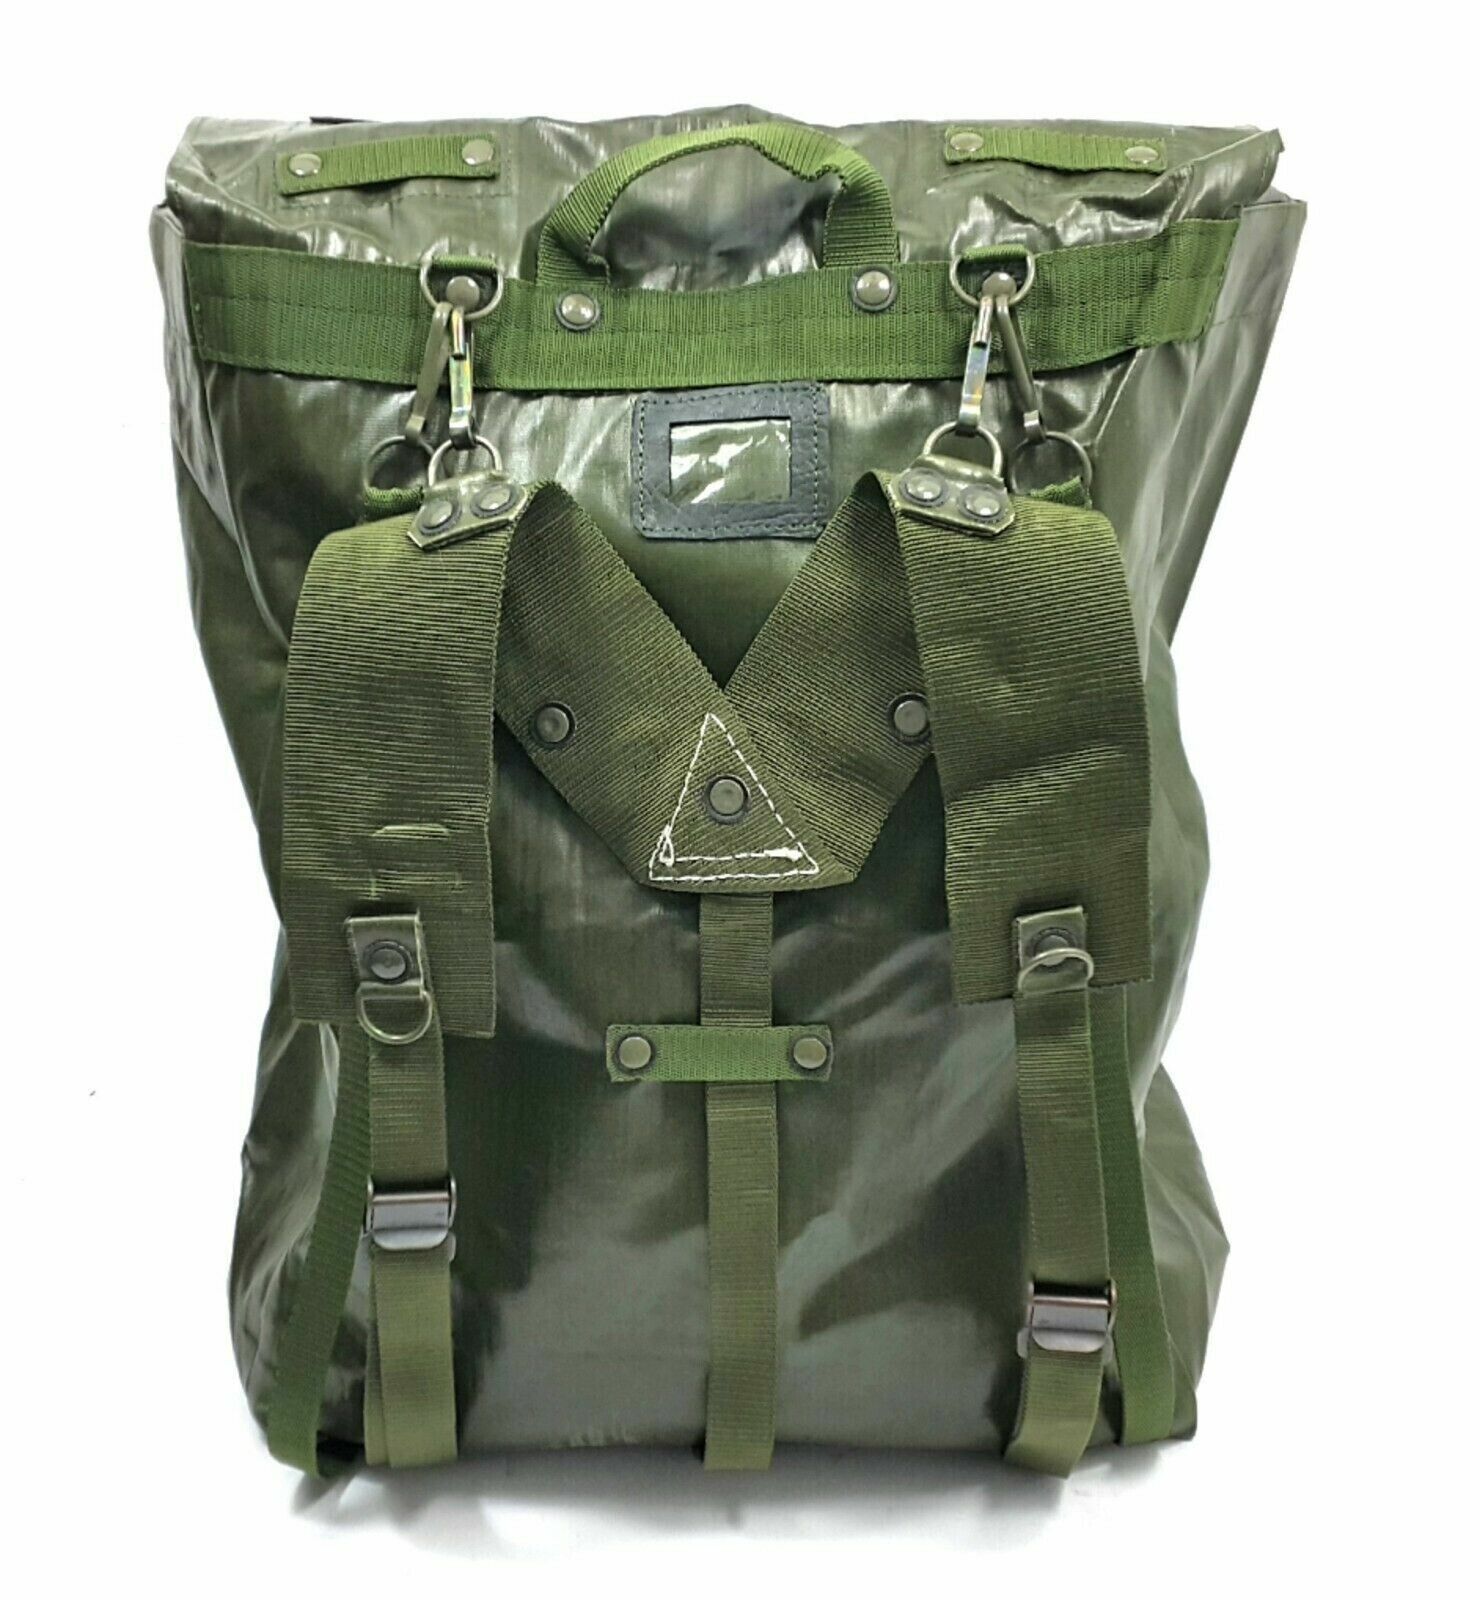 Czech Military M85 Waterproof Rucksack w/straps, Grade 1 condition,free shipping